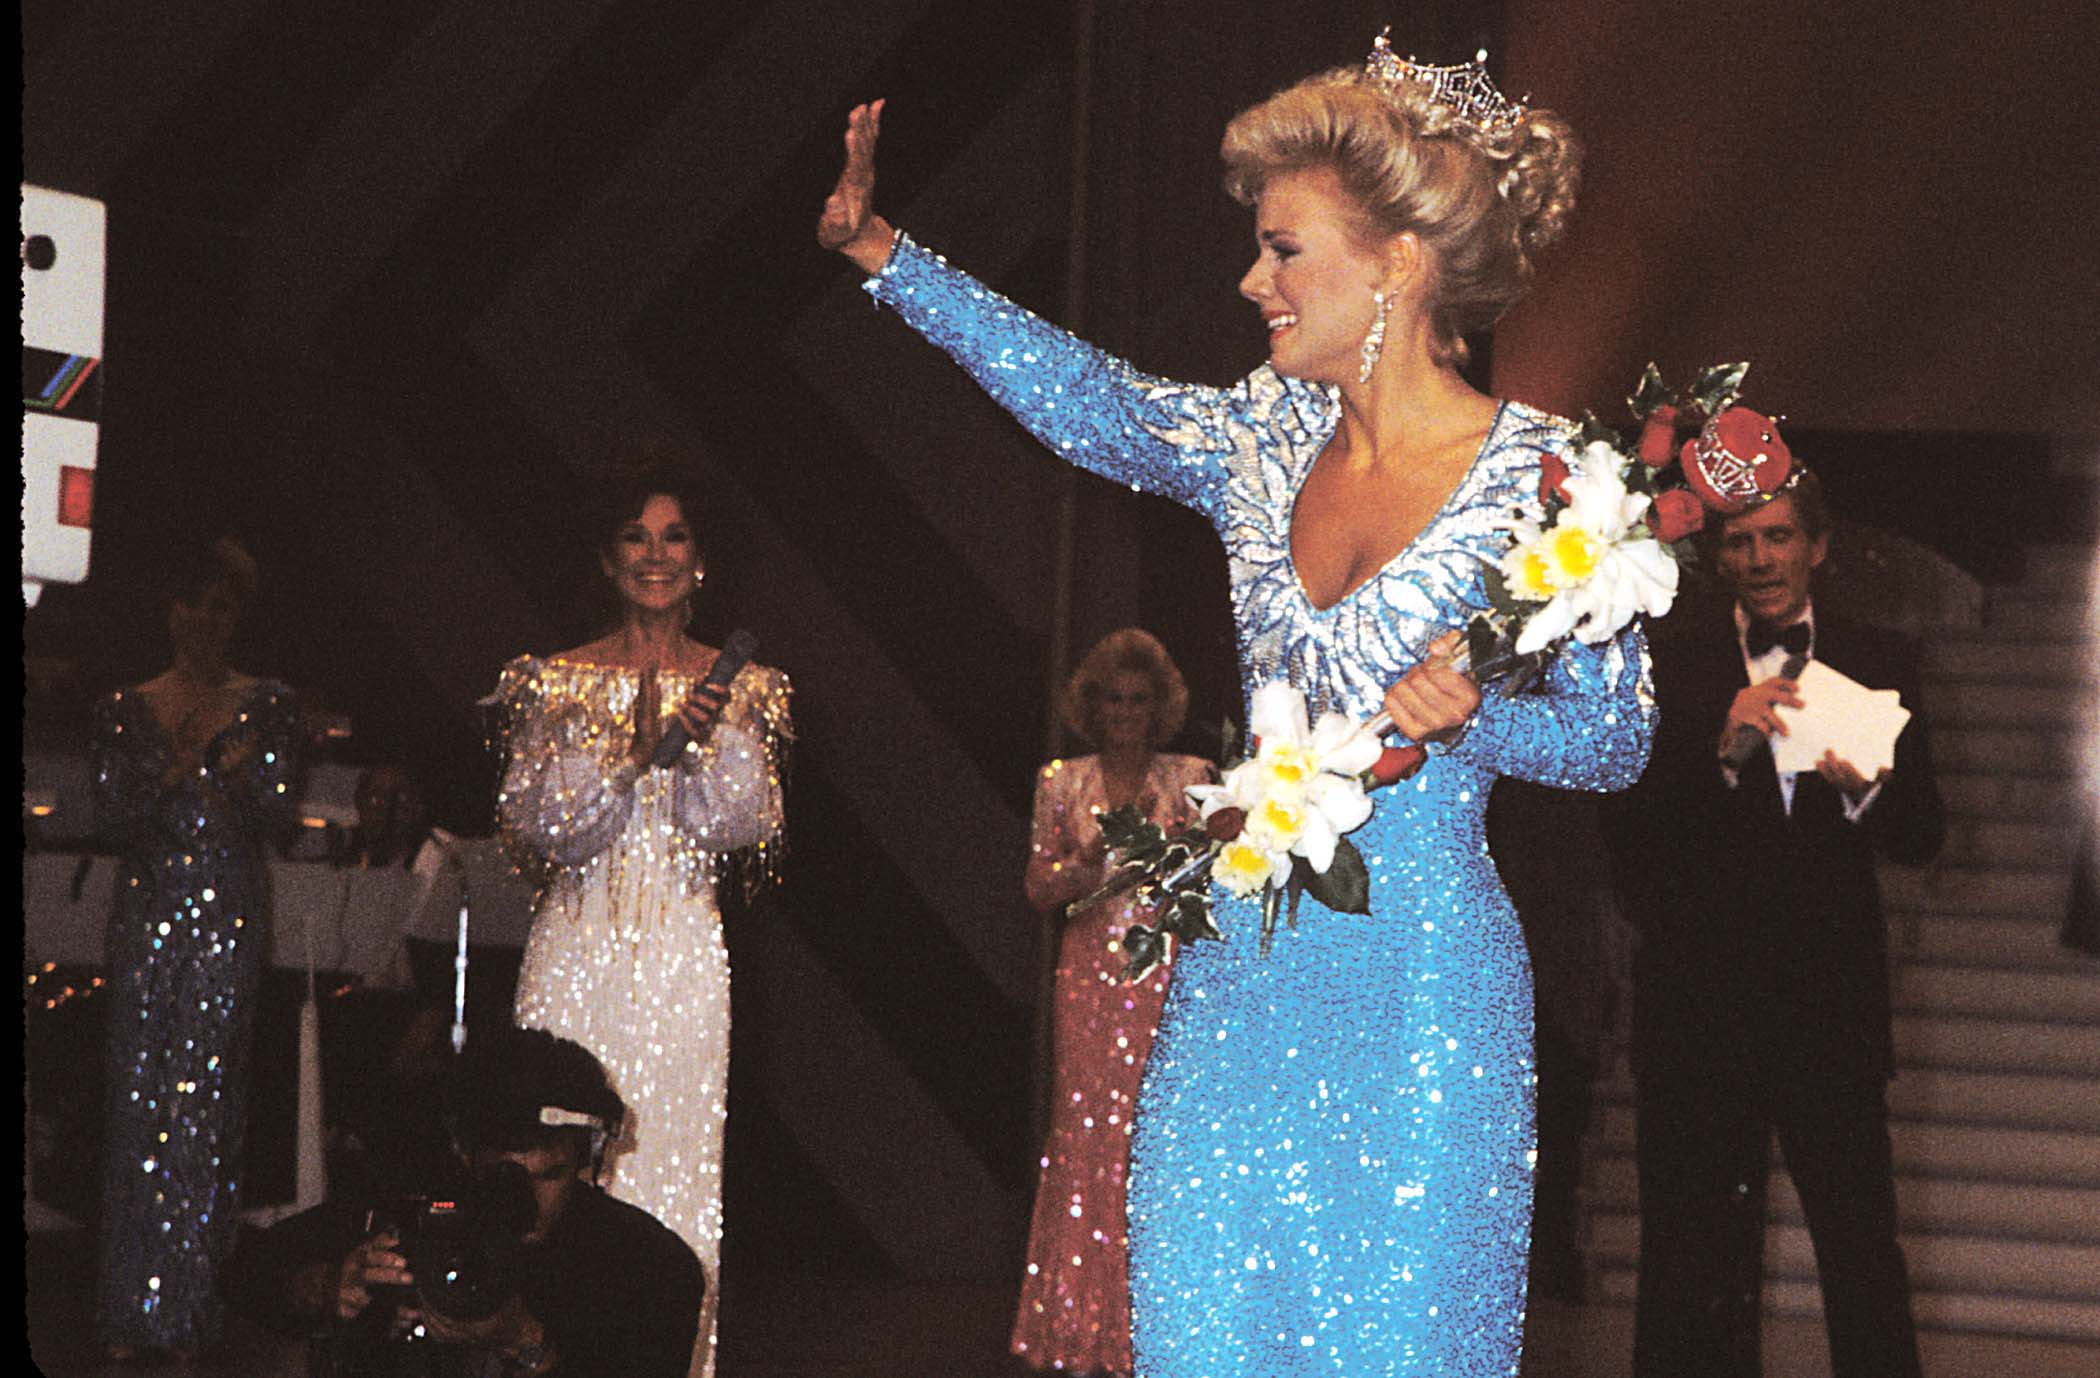 Gretchen Carlson wearing a blue dress and holding flowers at the Miss America pageant in 1988